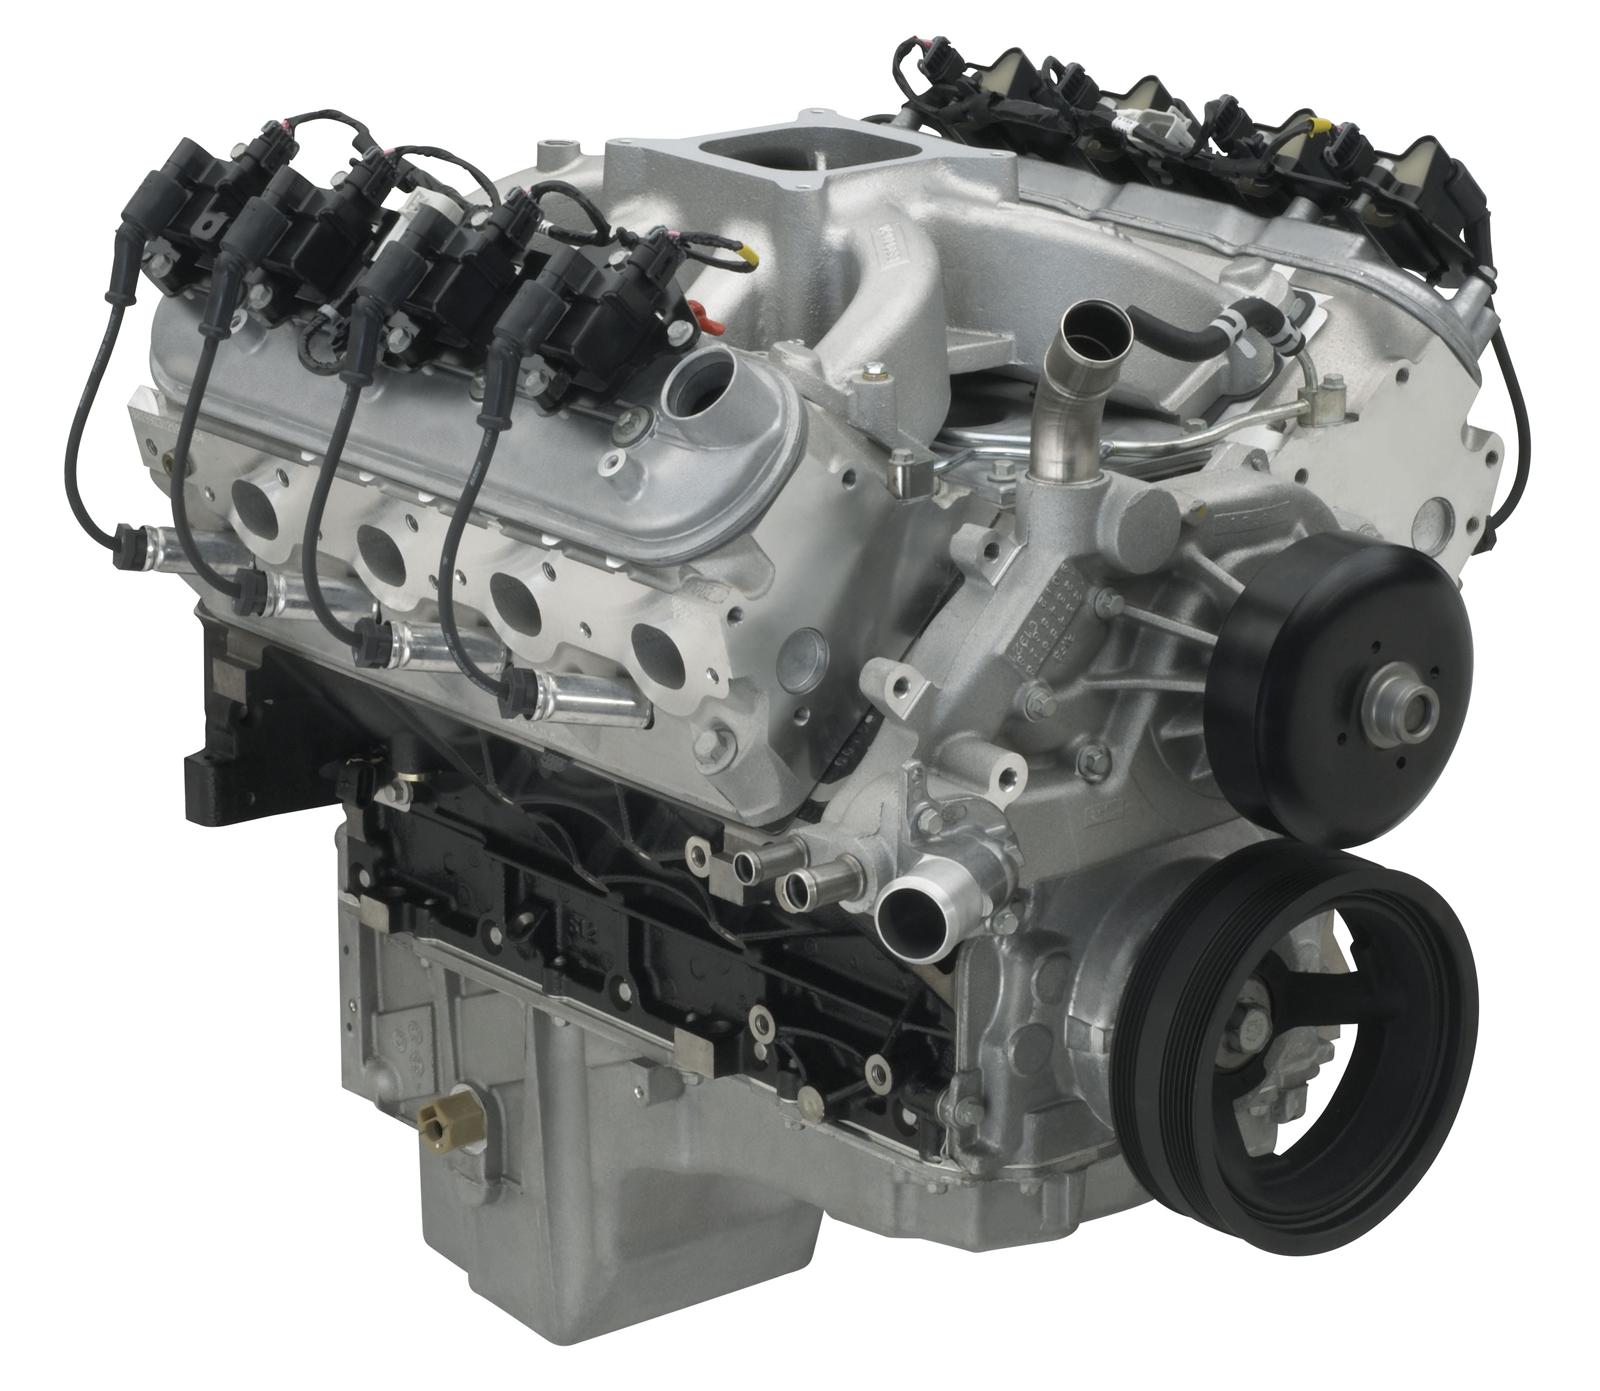 The engine can range from the 350, 383 stroker, 427, 454, 502 and 540 big b...